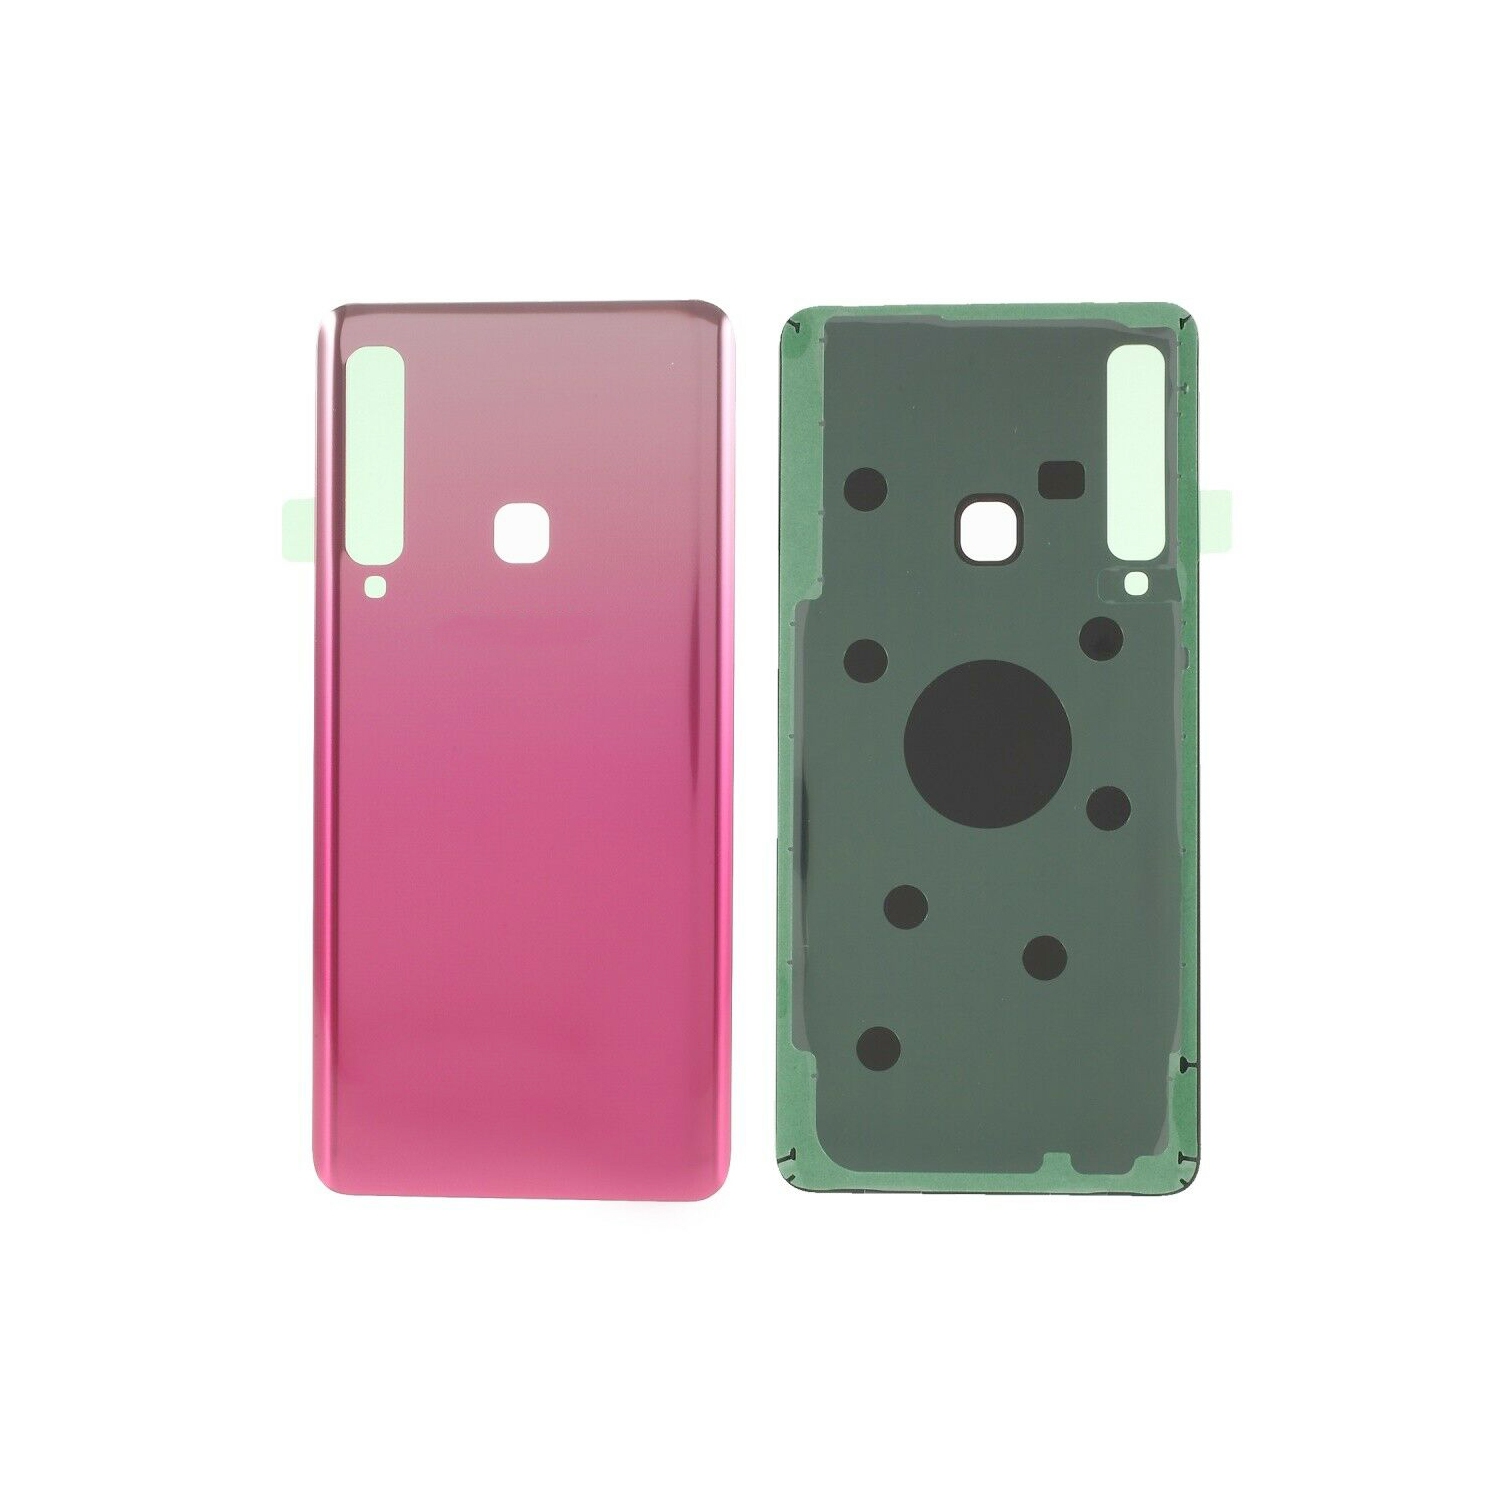 Replacement Battery Back Housing Glass Cover Compatible With Samsung Galaxy A9 (2018) - Bubblegum Pink